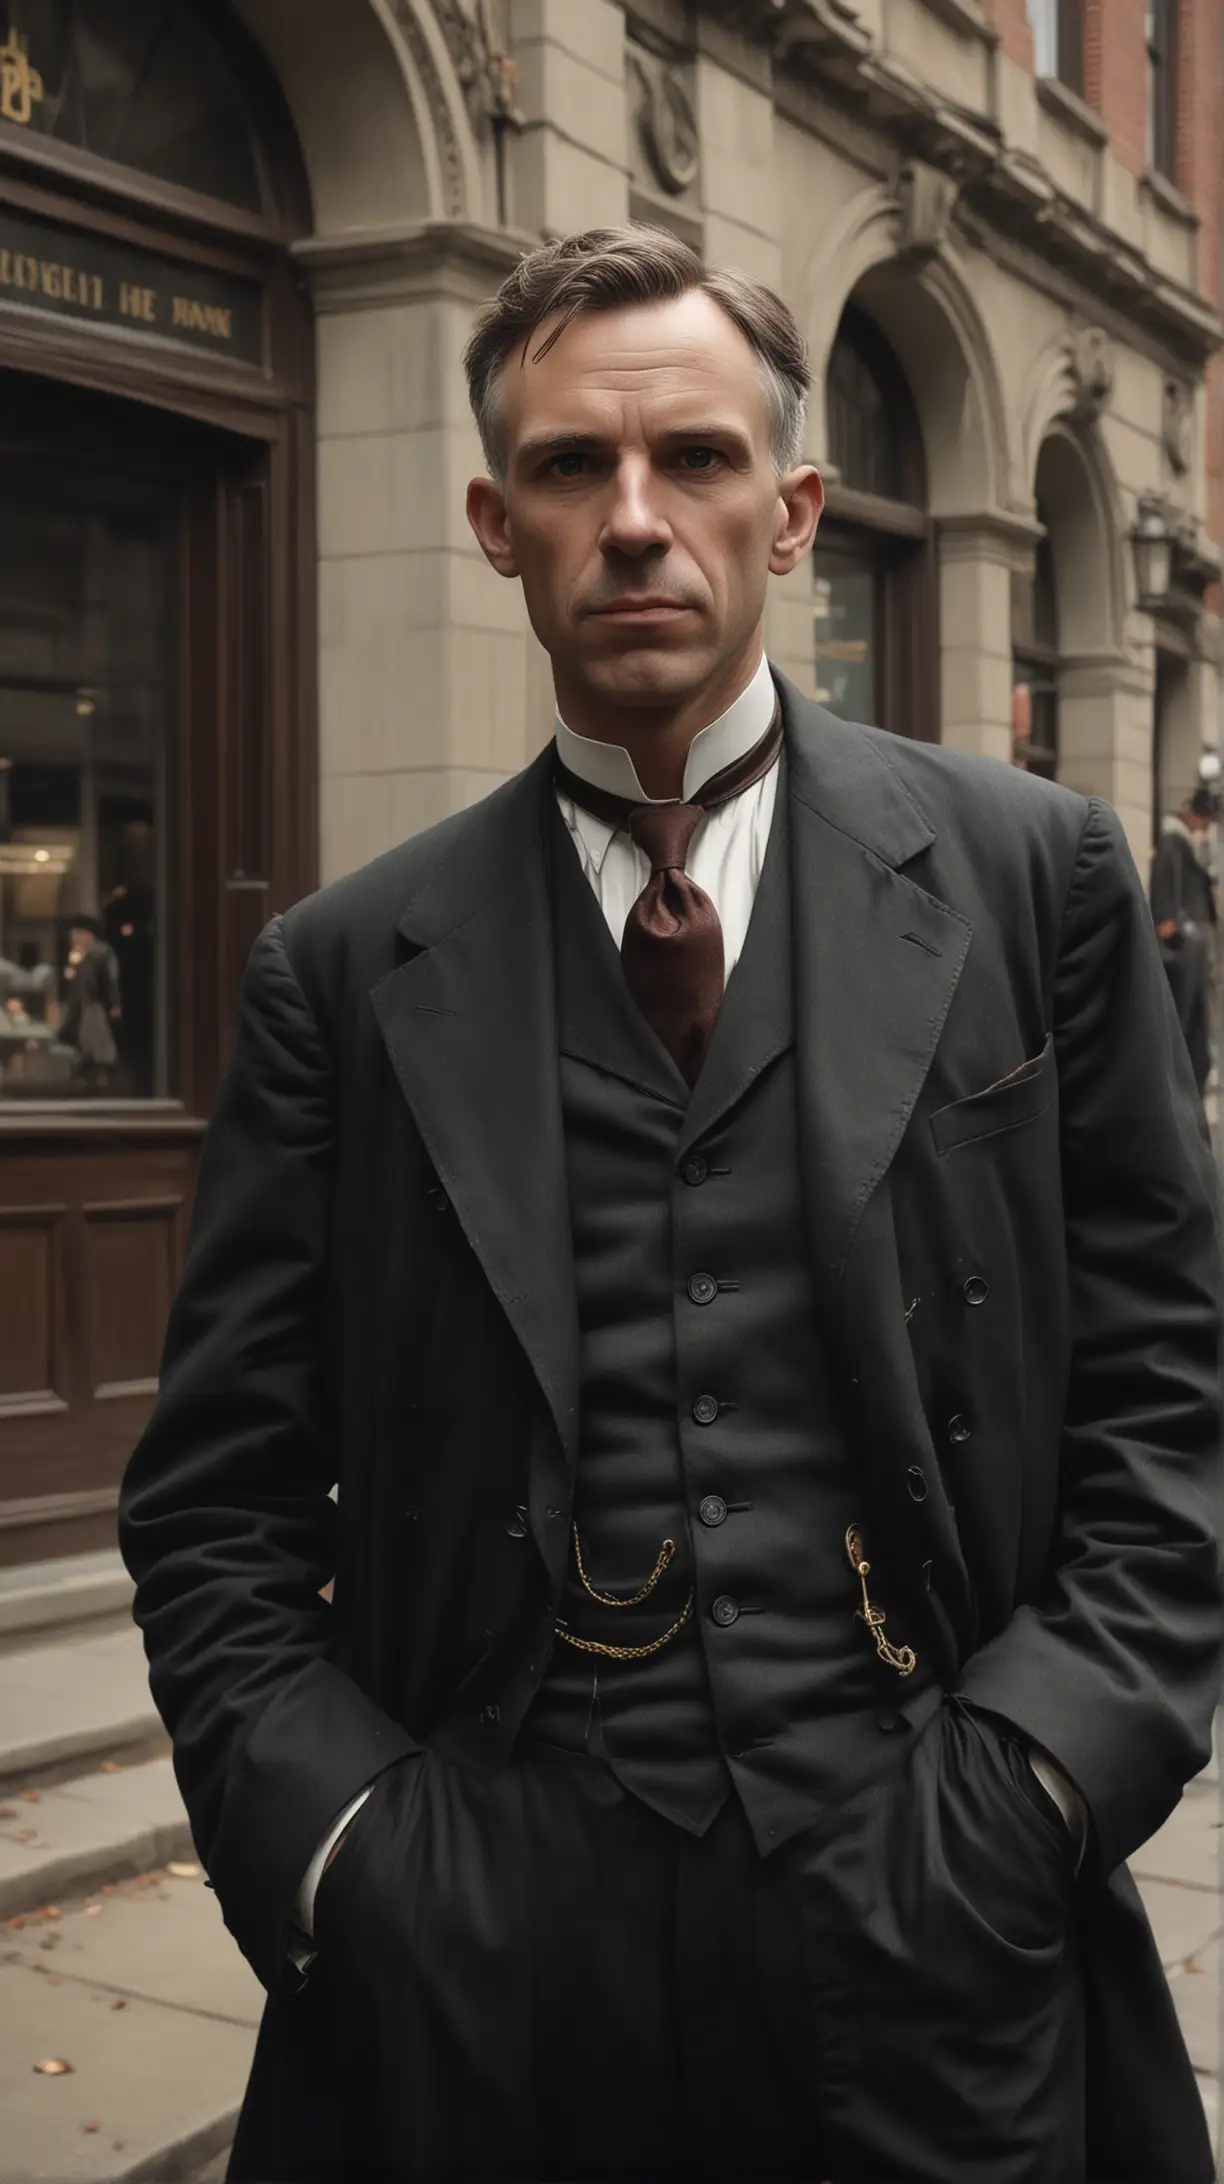 Historical Portrait of Henry Ford Standing Outside the Bank 1896